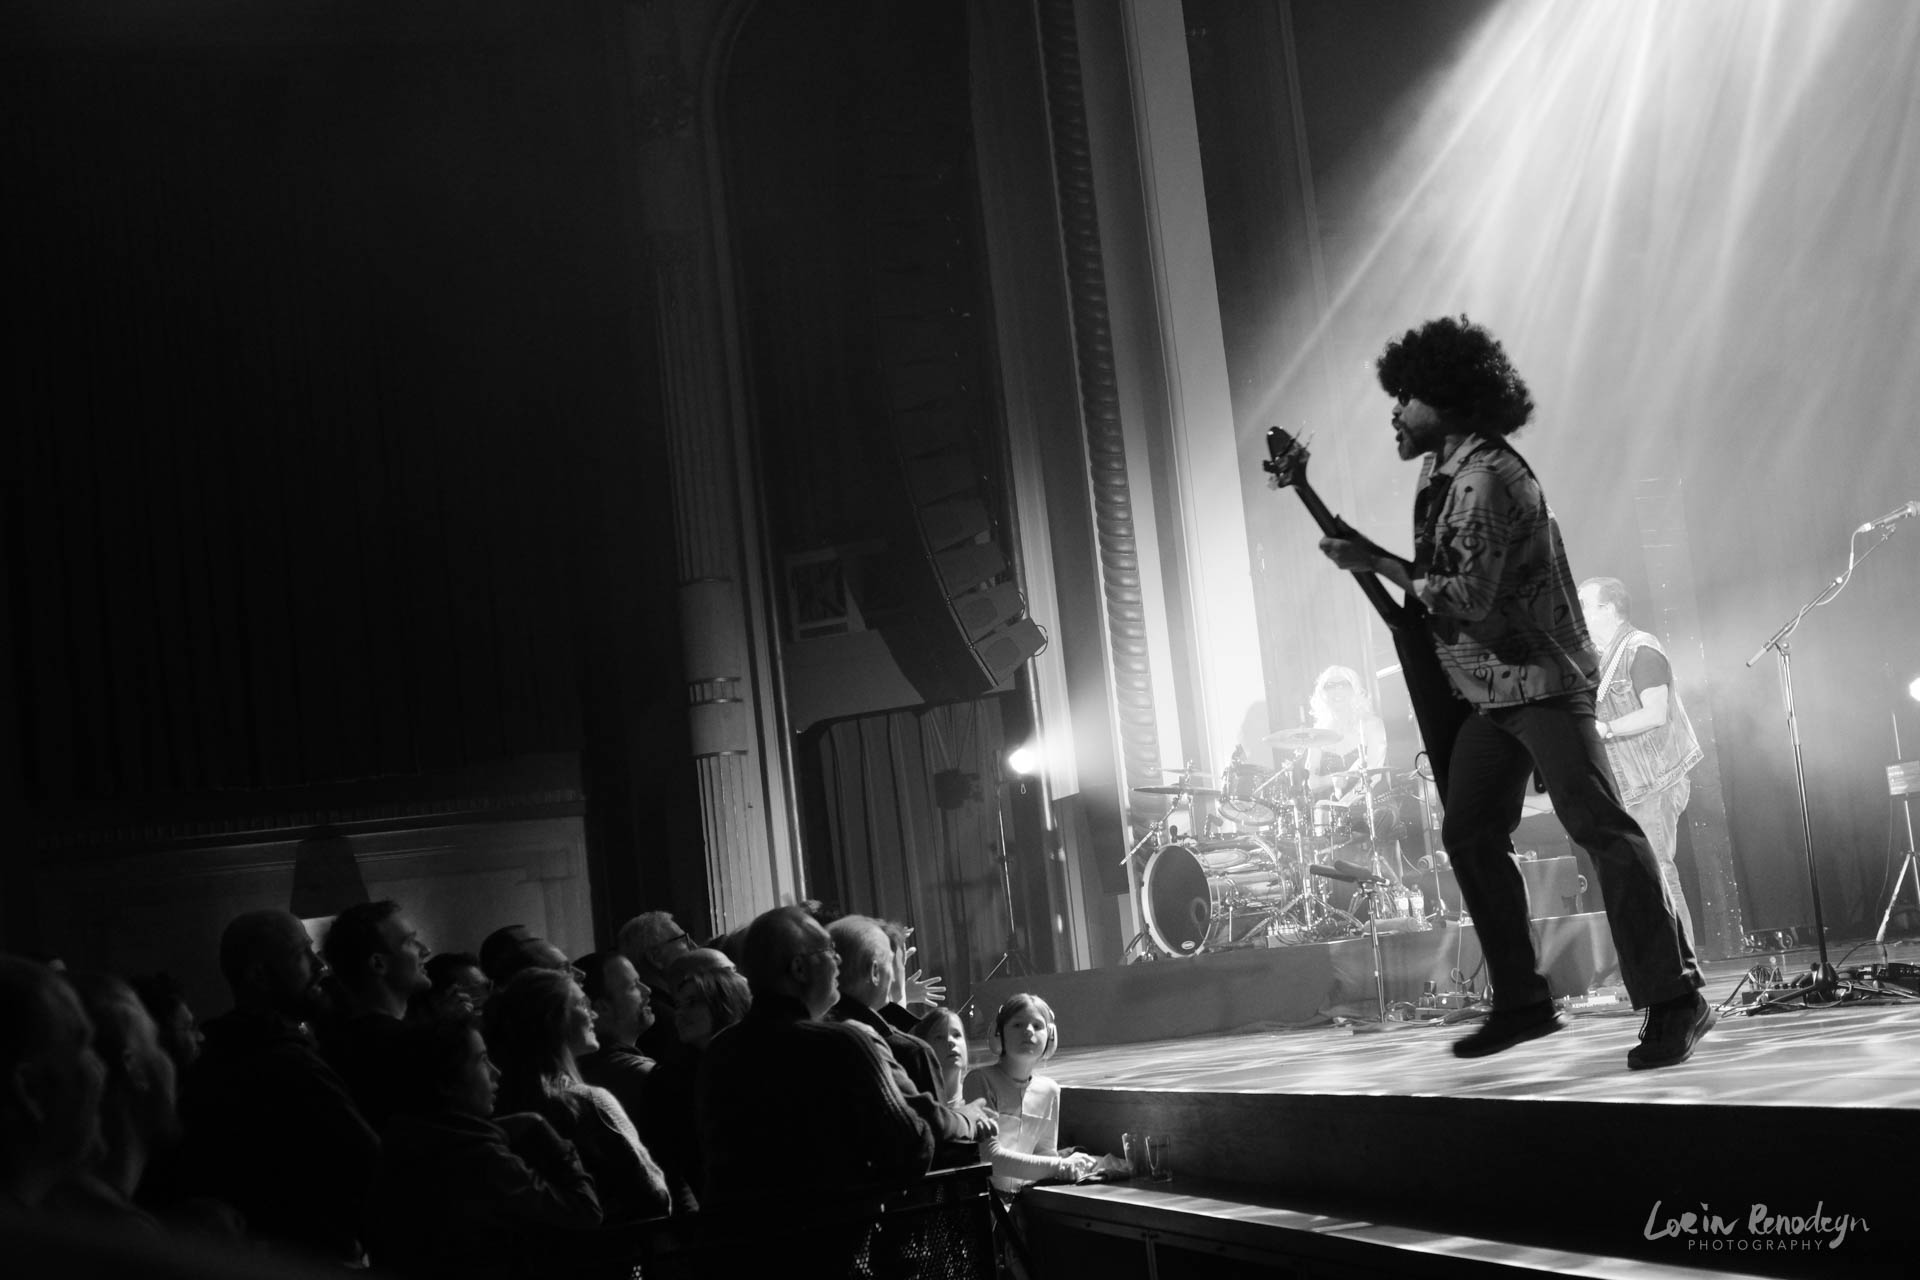 Black and white photo of a concert shot from the right side of the stage. The left half of the image is darkened with the audience on the bottom left. Light streams in from the top right down to the middle center, illuminating the stage. The sihouette of a guitar player can be seen at the front of the stage, approaching the crowd.